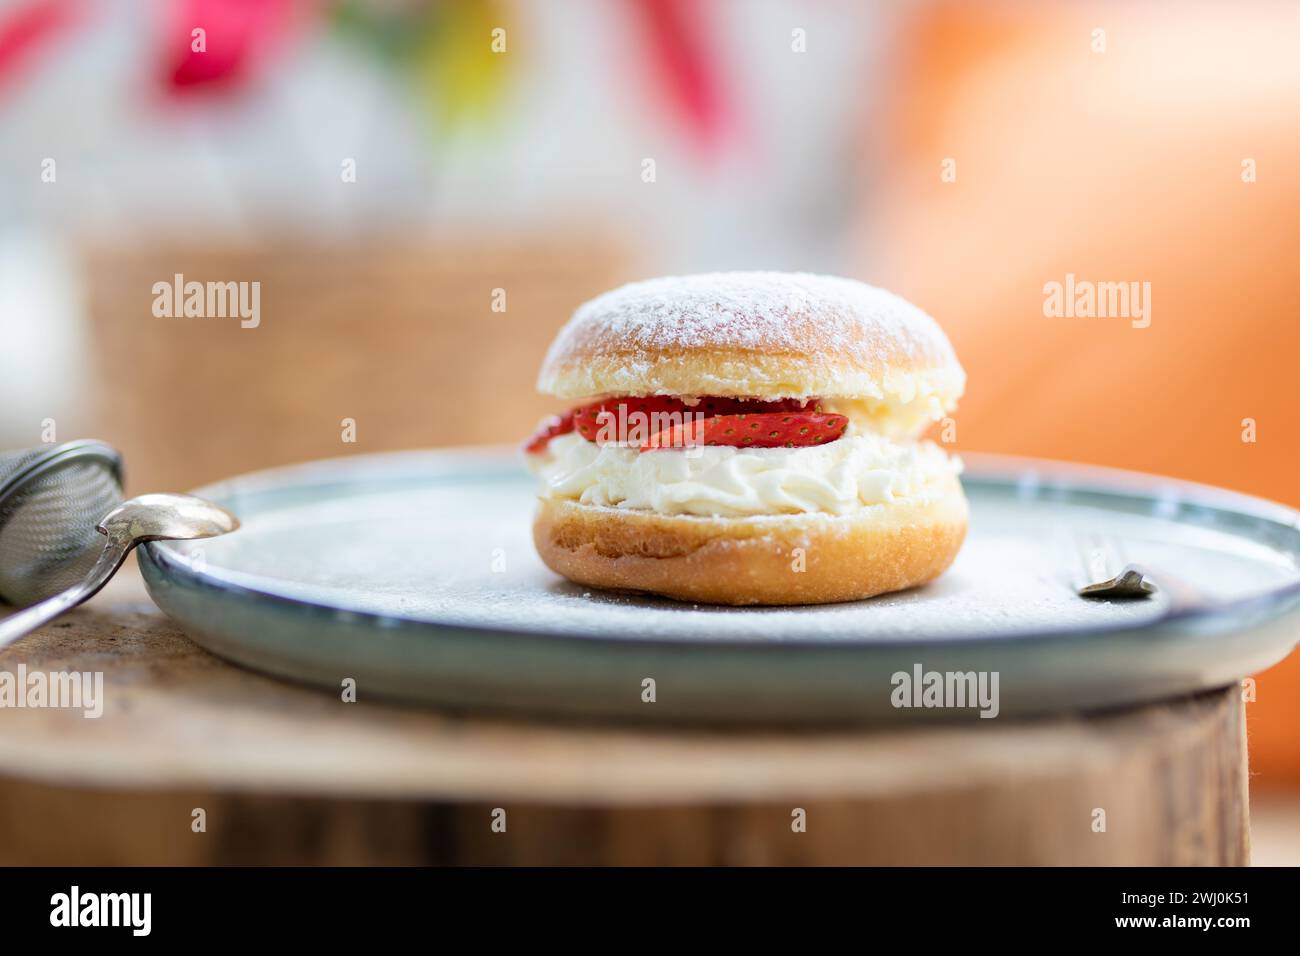 A decadent Berliner pastry oozing with luscious cream and adorned with fresh strawberries Stock Photo